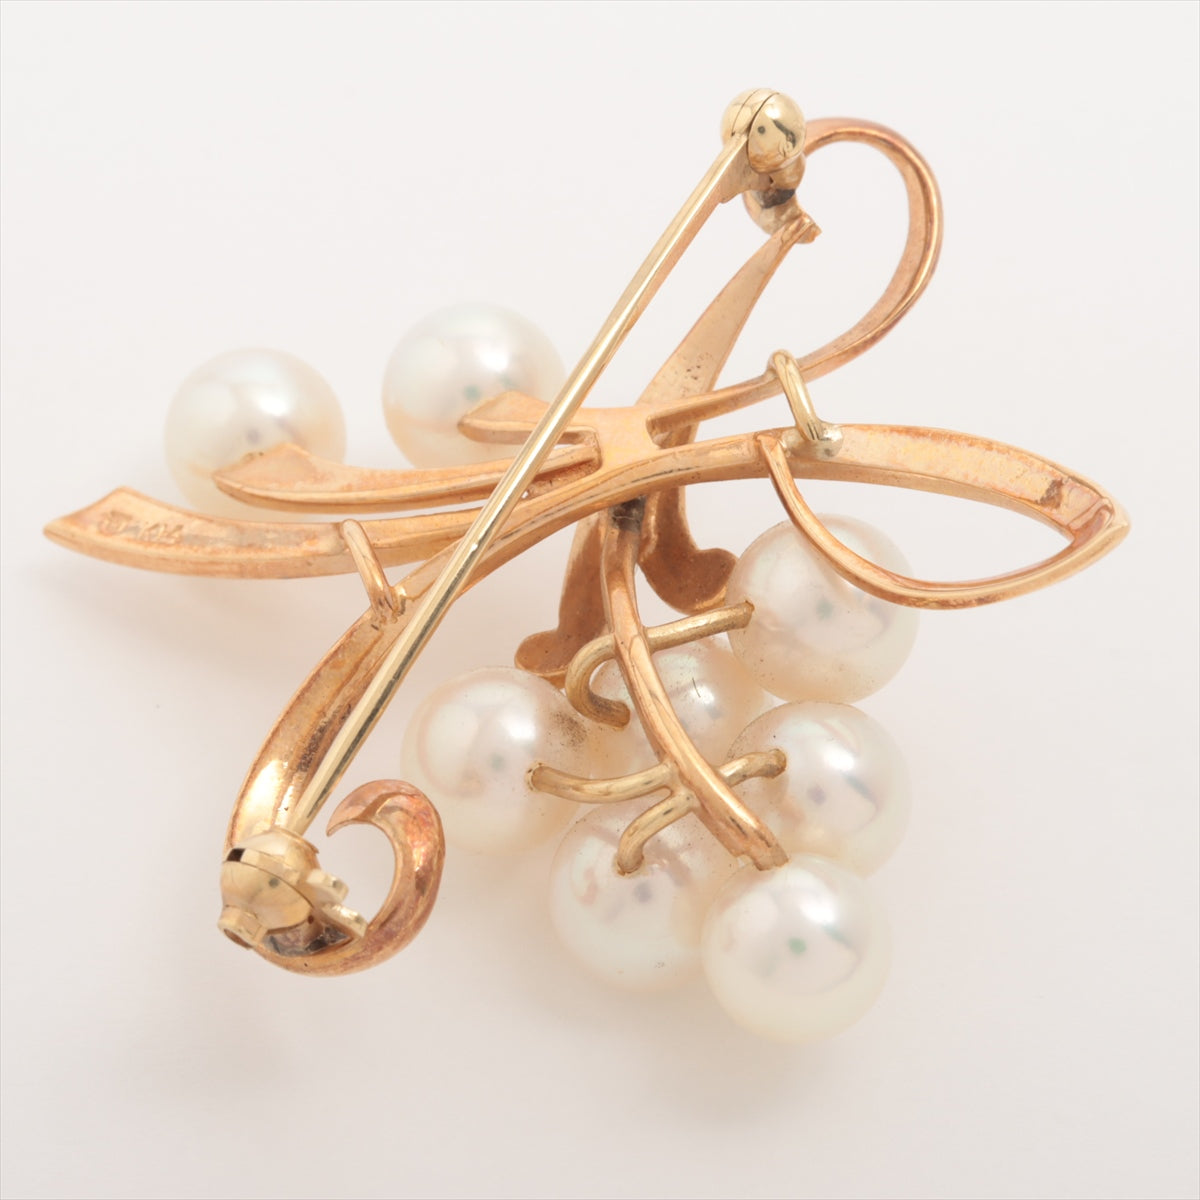 Mikimoto Pearl Brooch K14(YG) 8.8g Approx. 6.5 to 7.0 mm Bullion discoloration Su hole